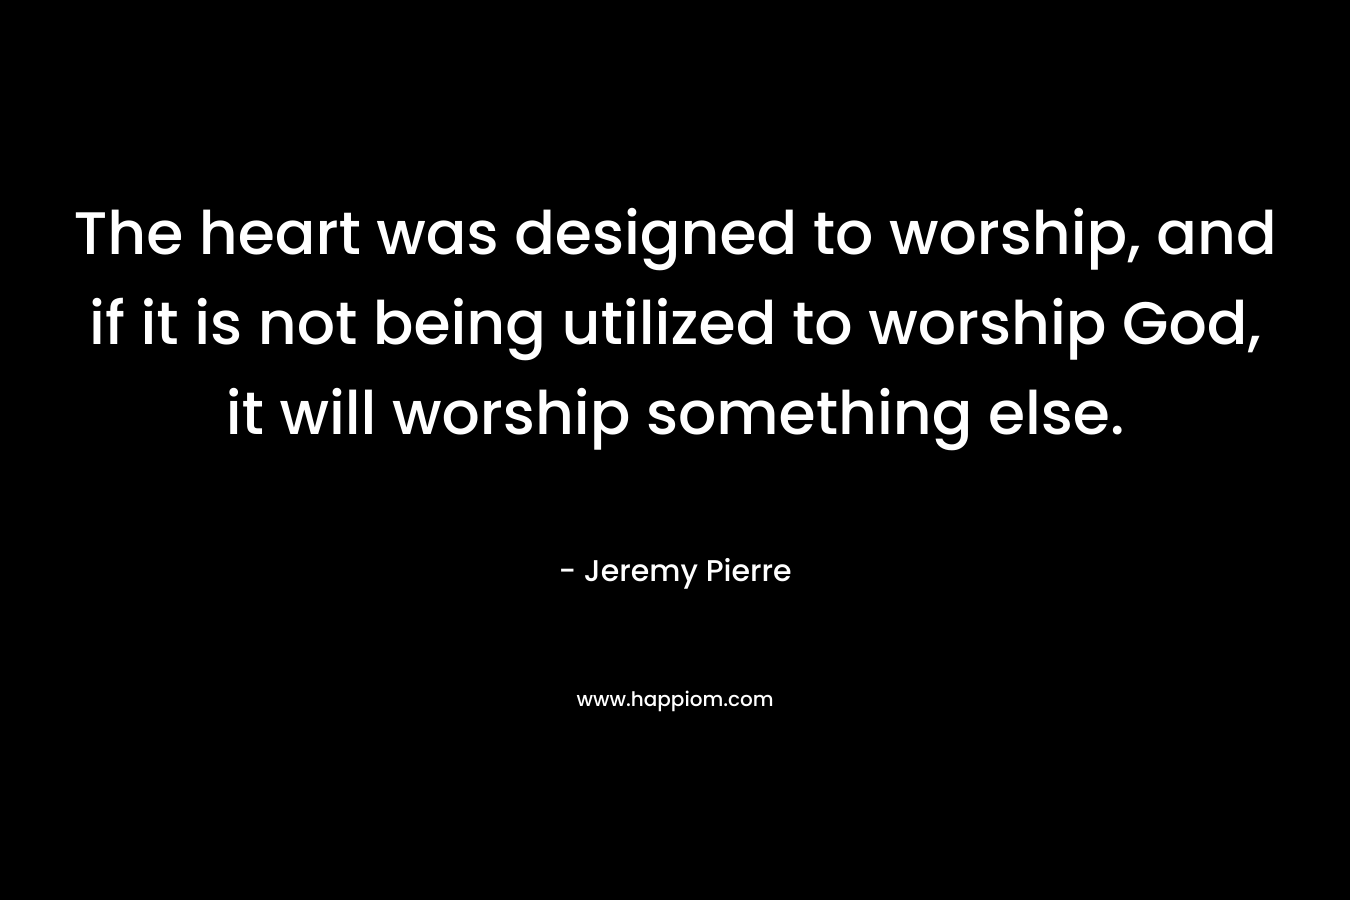 The heart was designed to worship, and if it is not being utilized to worship God, it will worship something else.